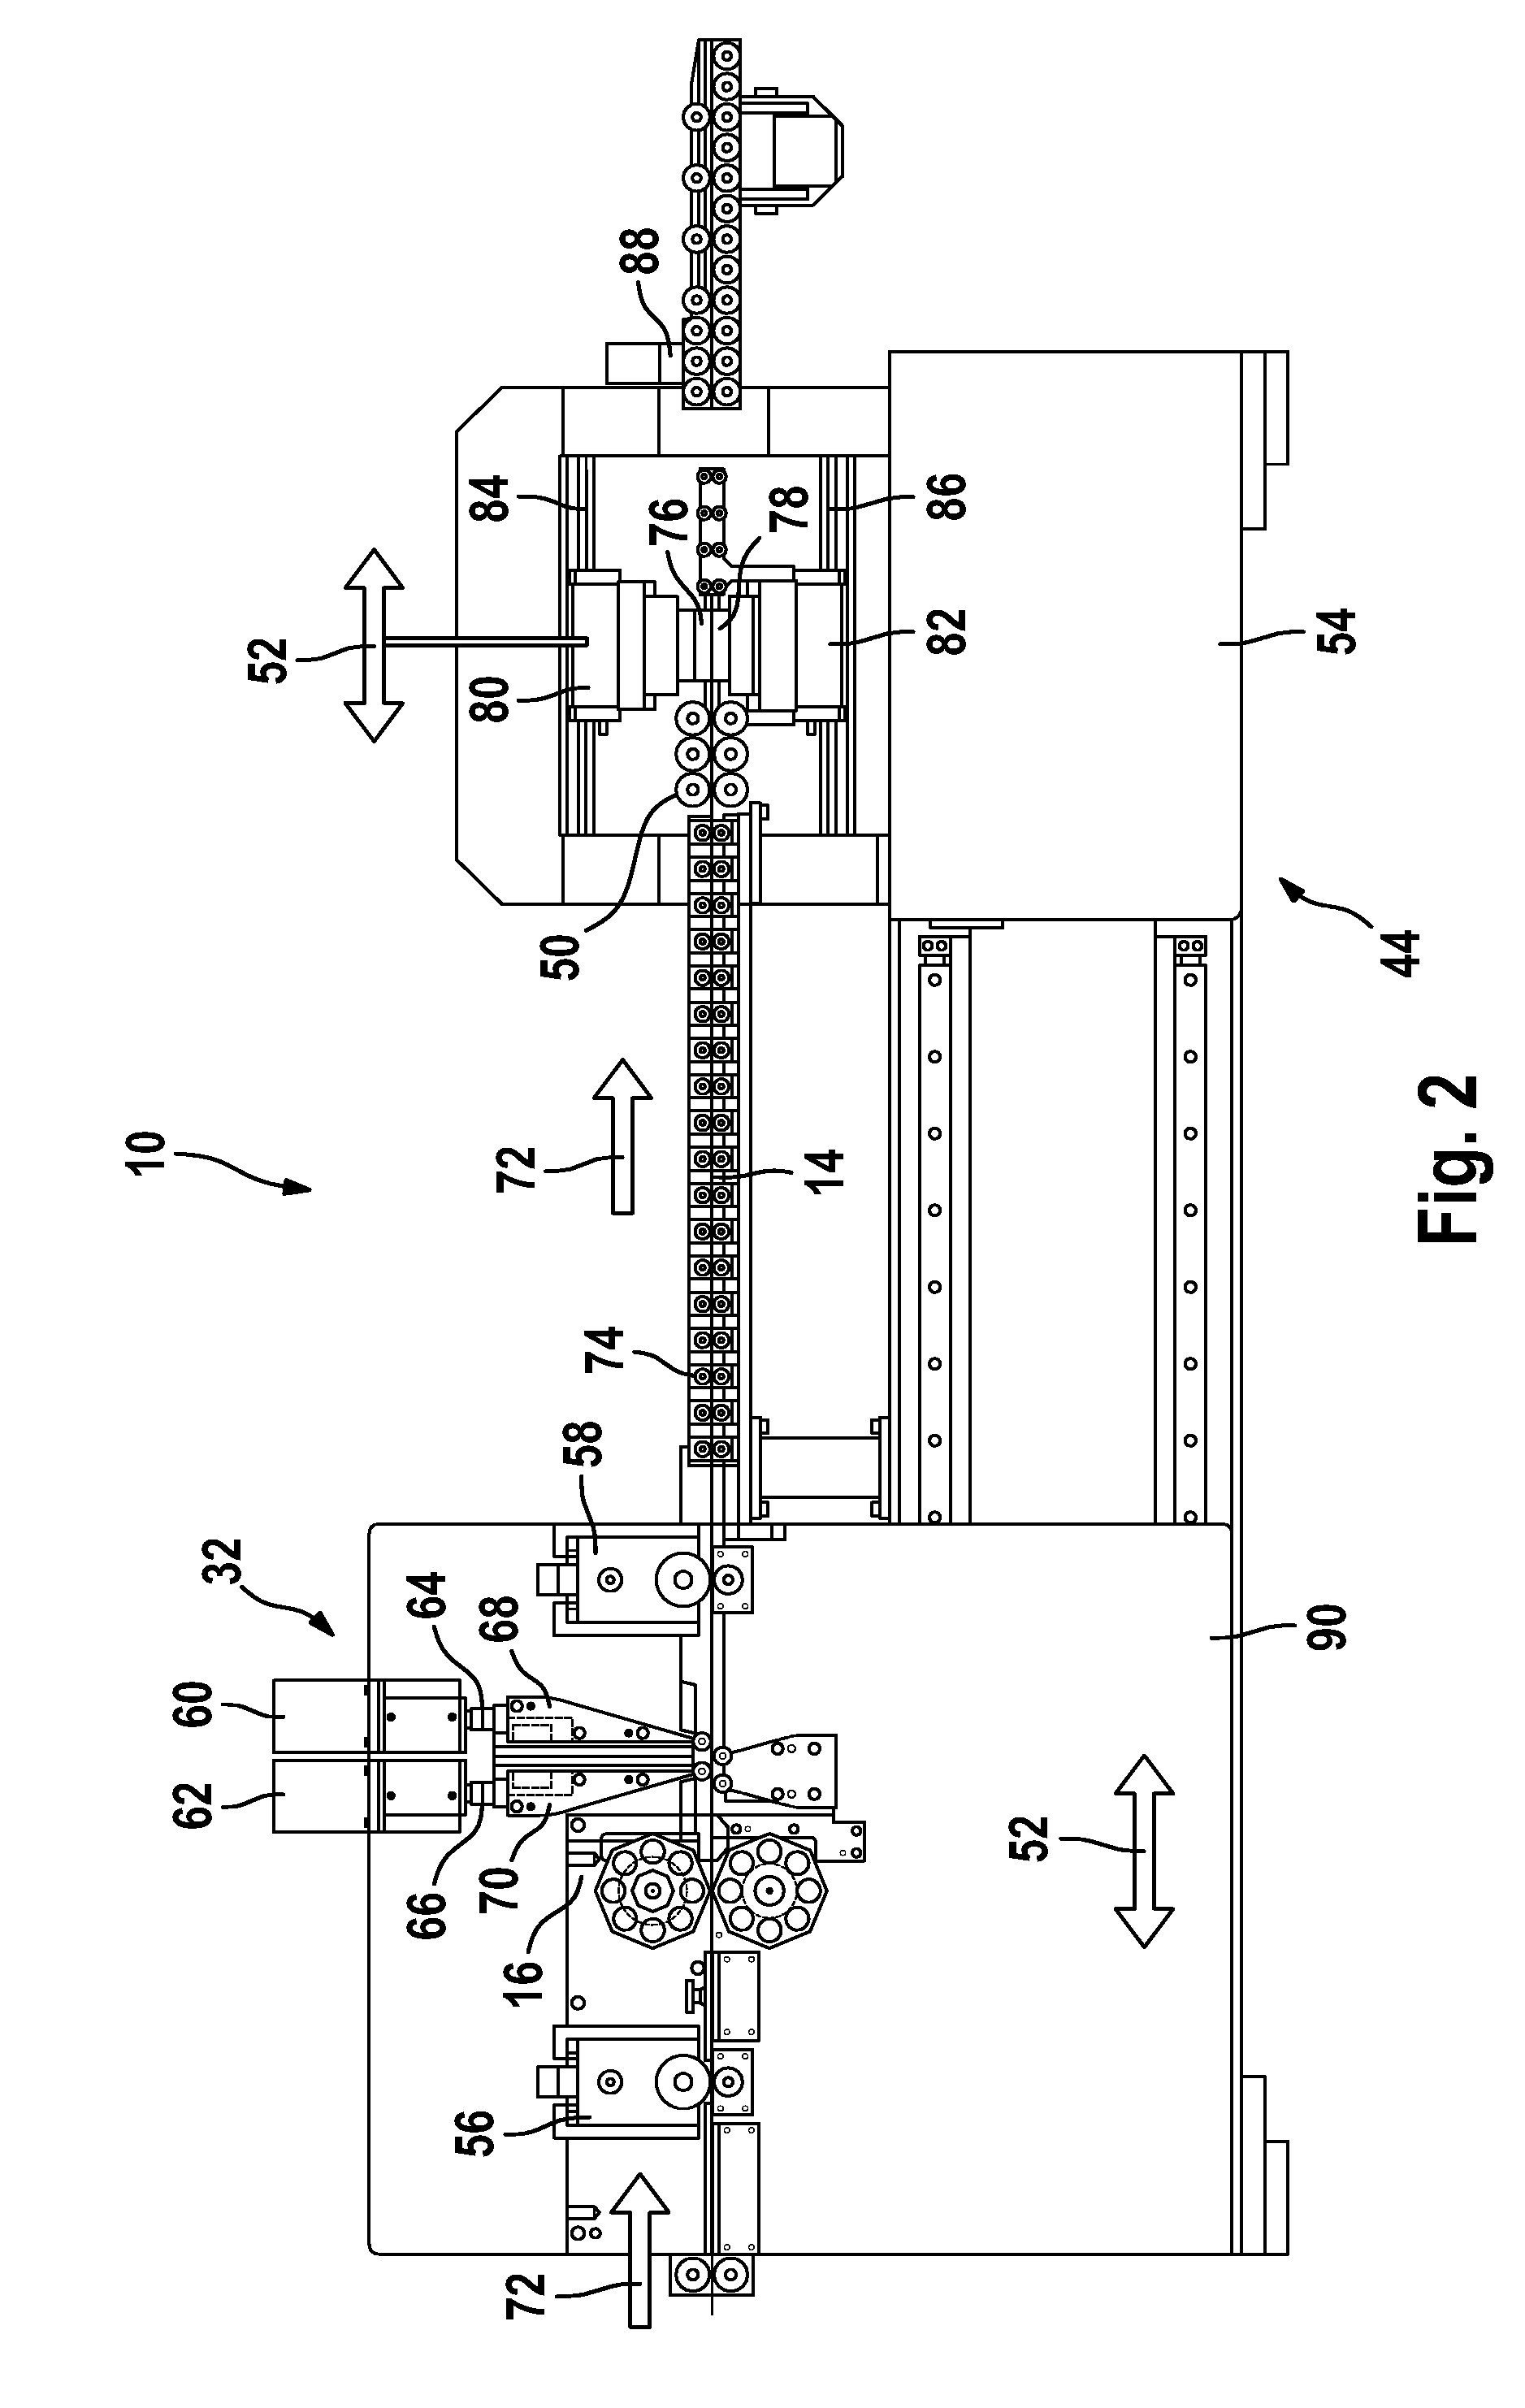 Method and Device For Producing Bent Spring Elements